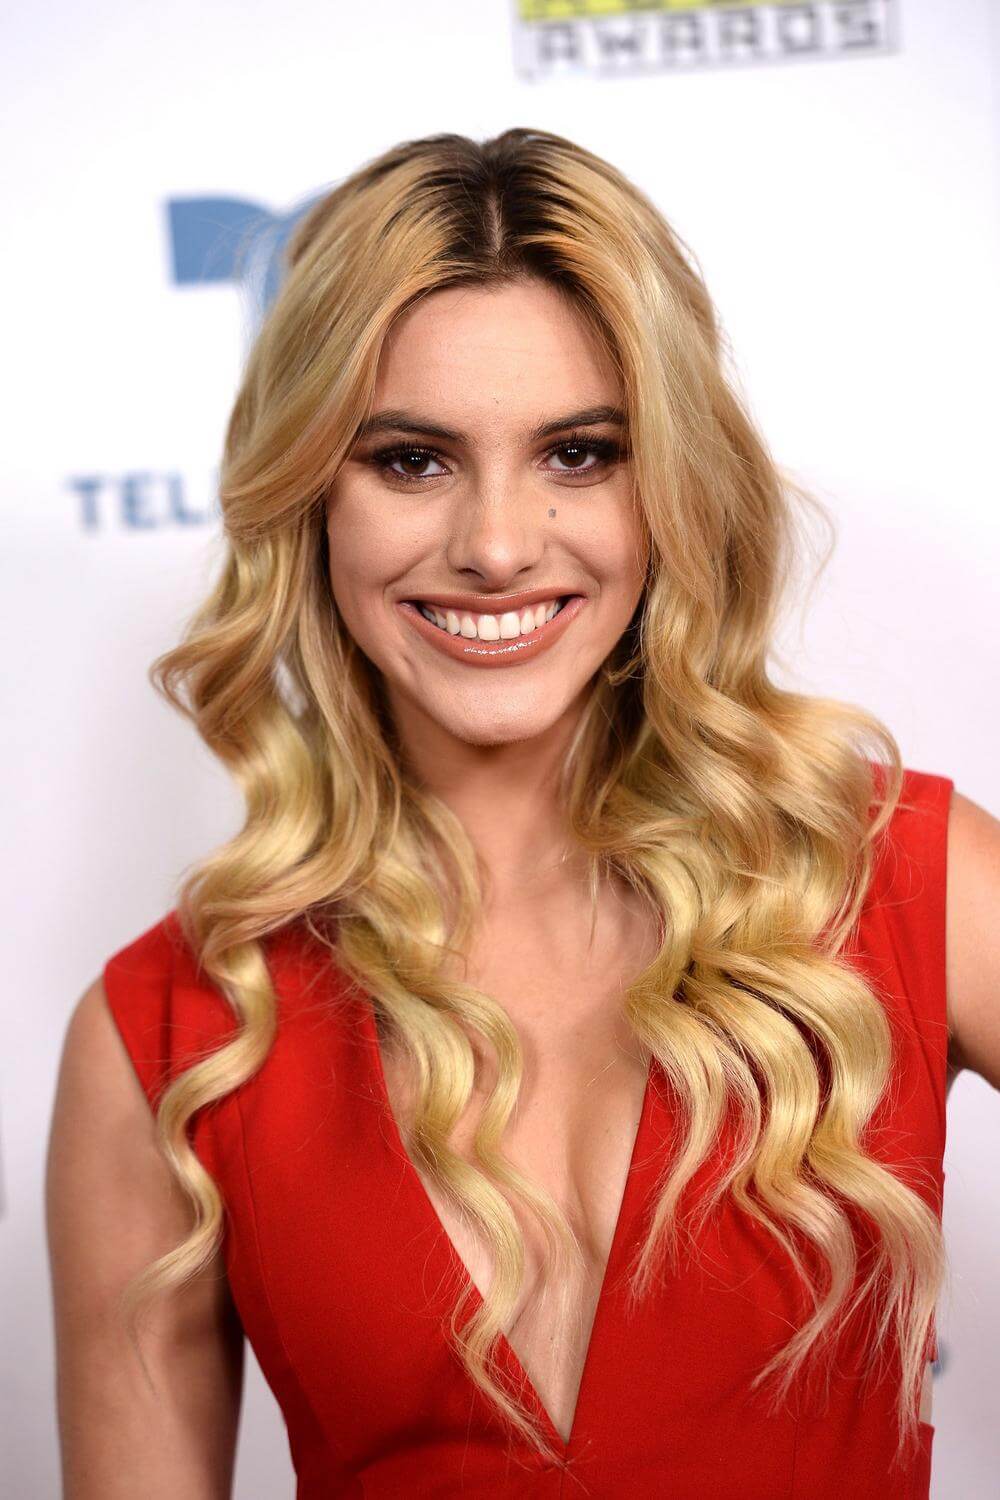 70+ Hot Pictures Of Lele Pons Are Like The Most Tastiest Sexy Chocolate You Ever Had 16